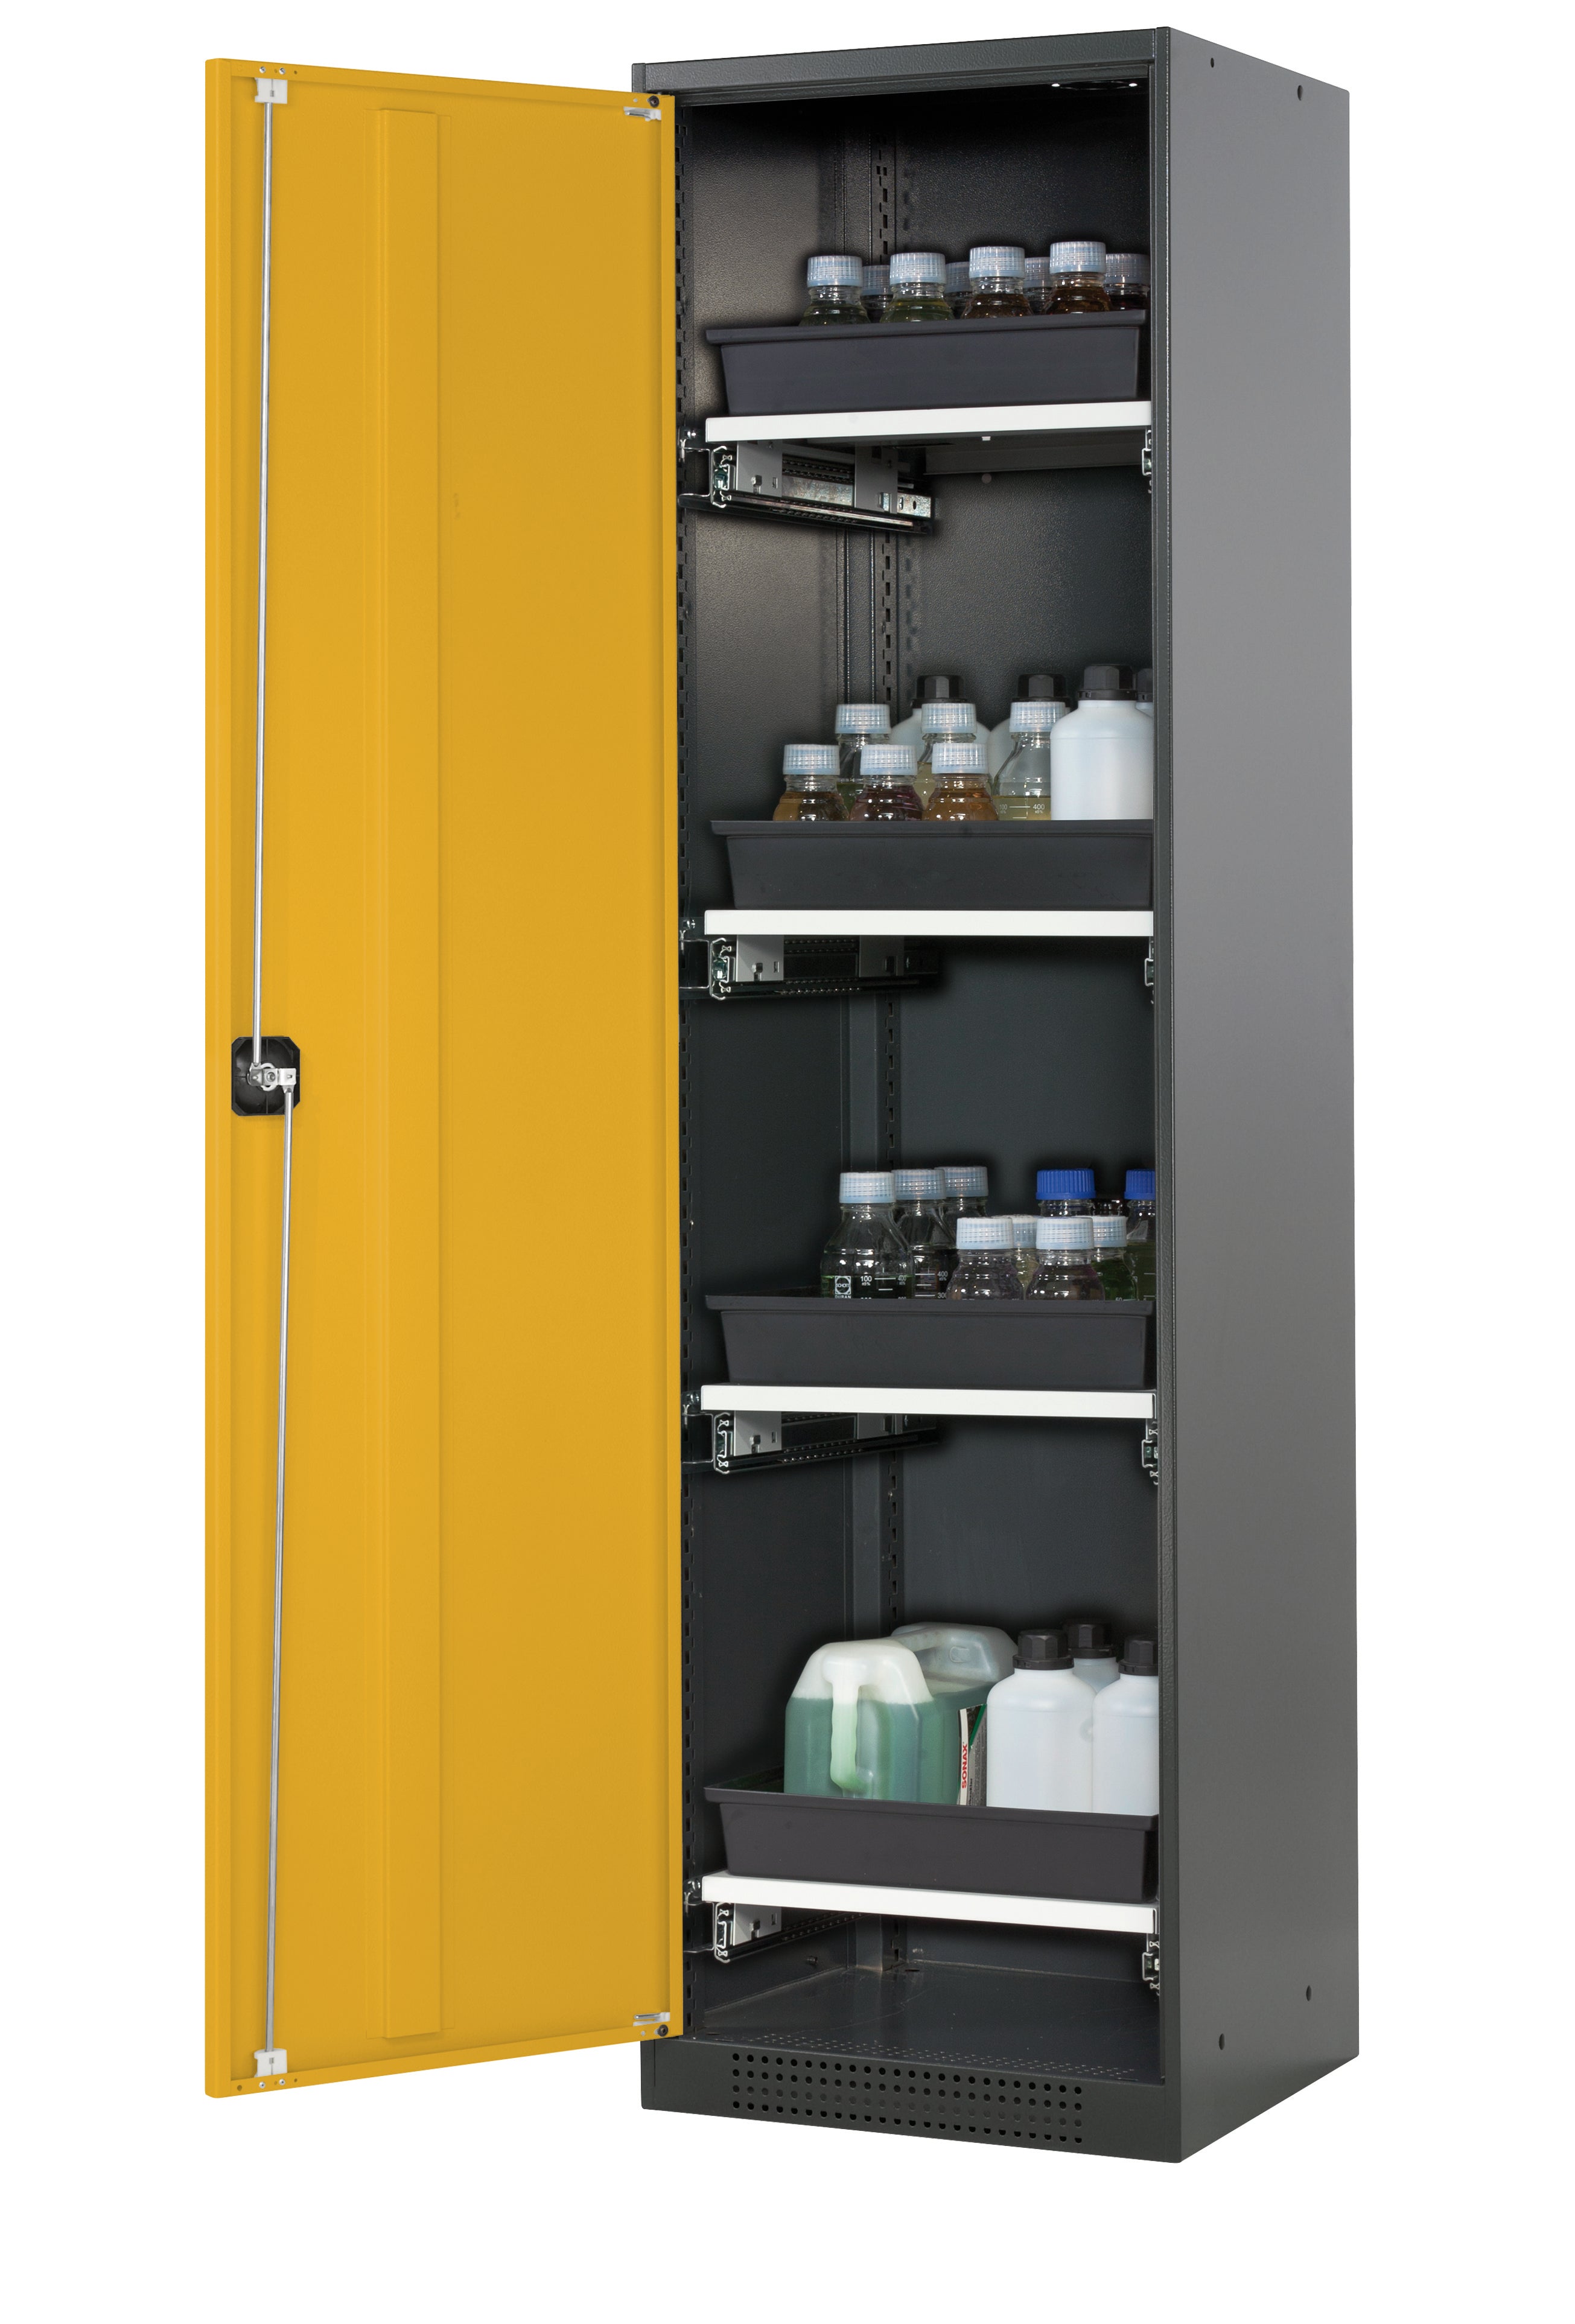 Chemical cabinet CS-CLASSIC model CS.195.054 in safety yellow RAL 1004 with 4x AbZ pull-out shelves (sheet steel/polypropylene)